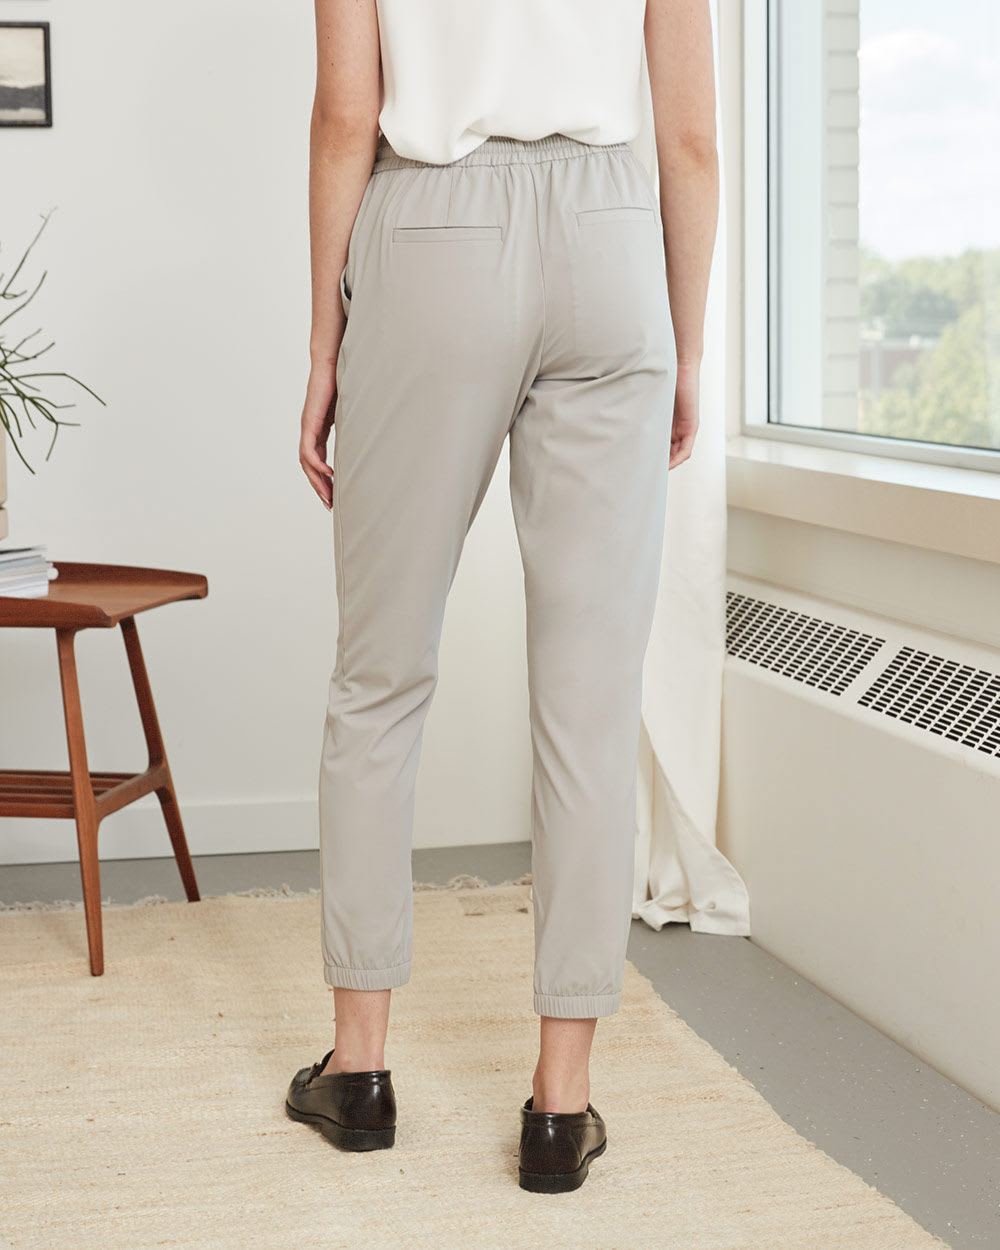 4-Way Stretch Mid-Rise Jogger Pant - 28.5"